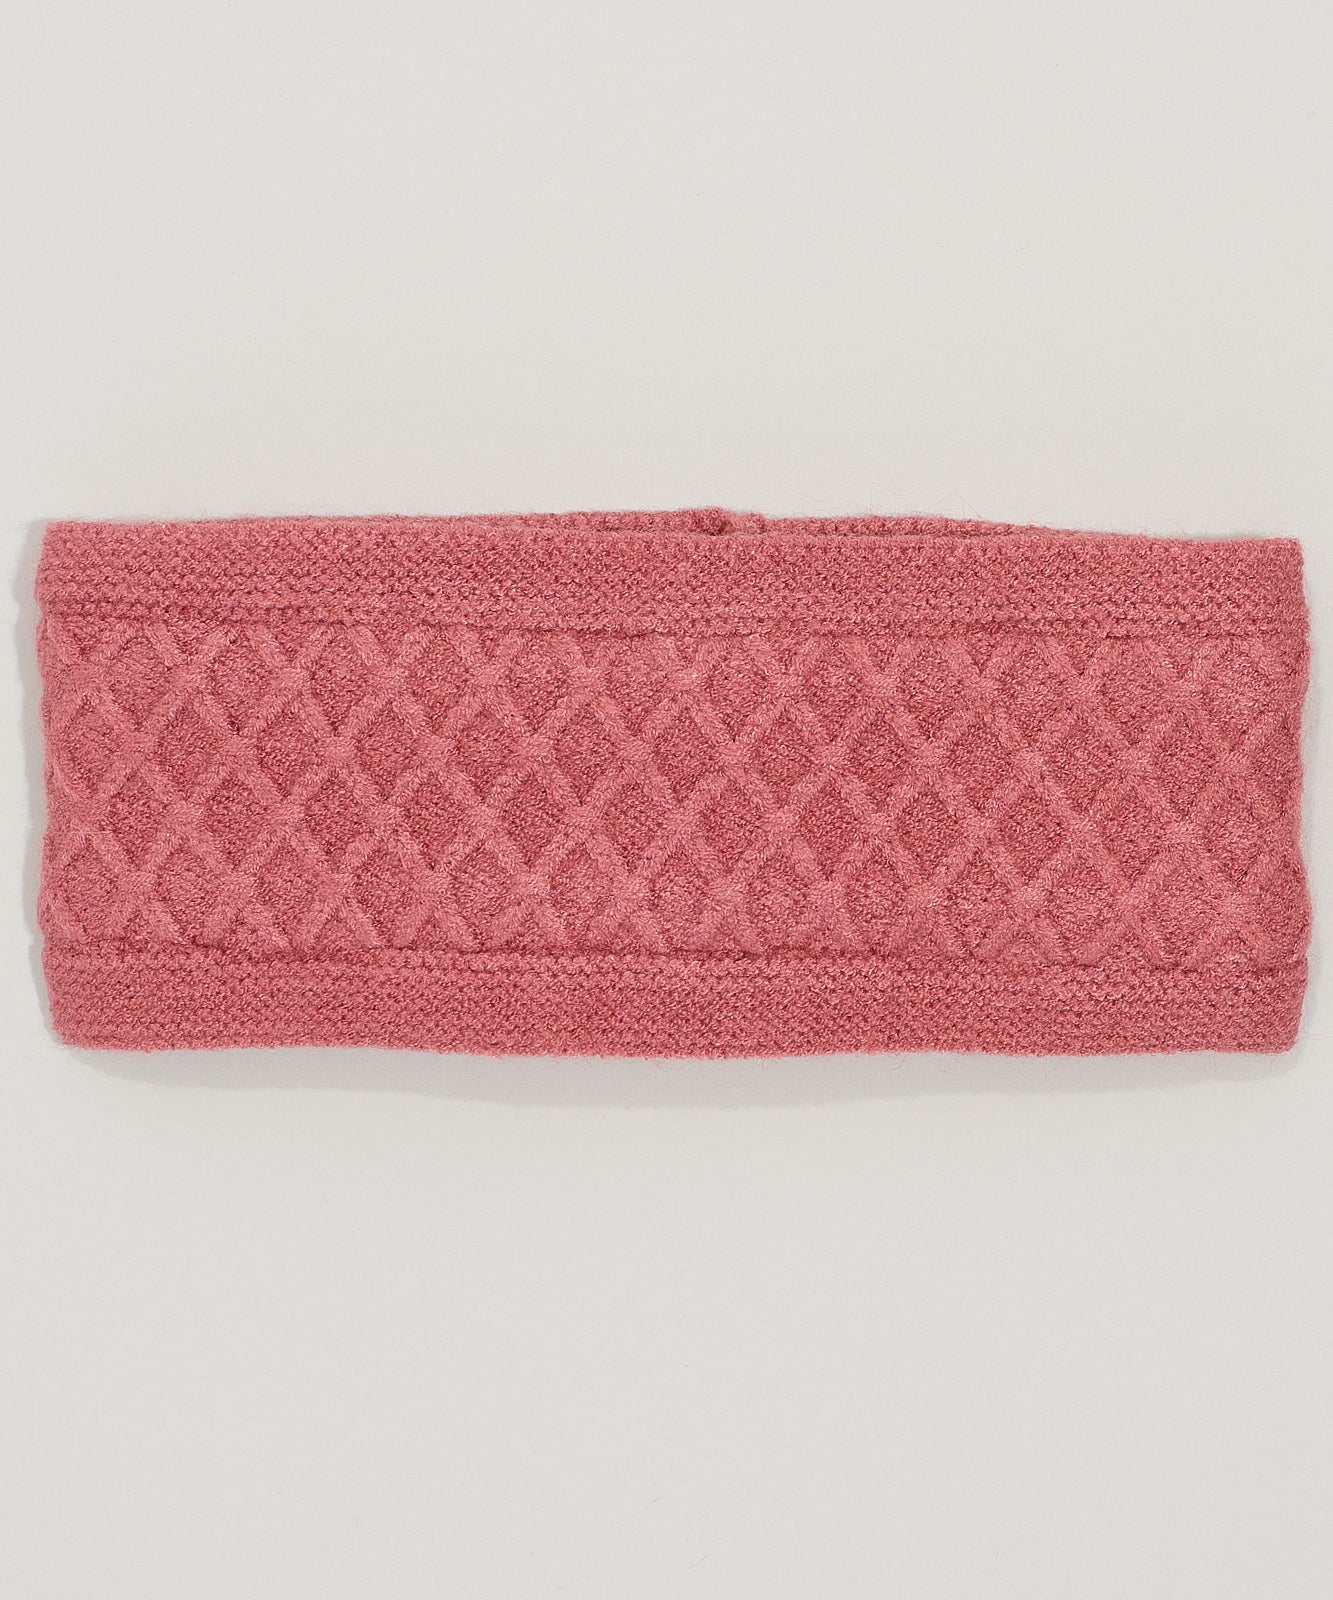 Diamond Cable Headband in color Rose Gold